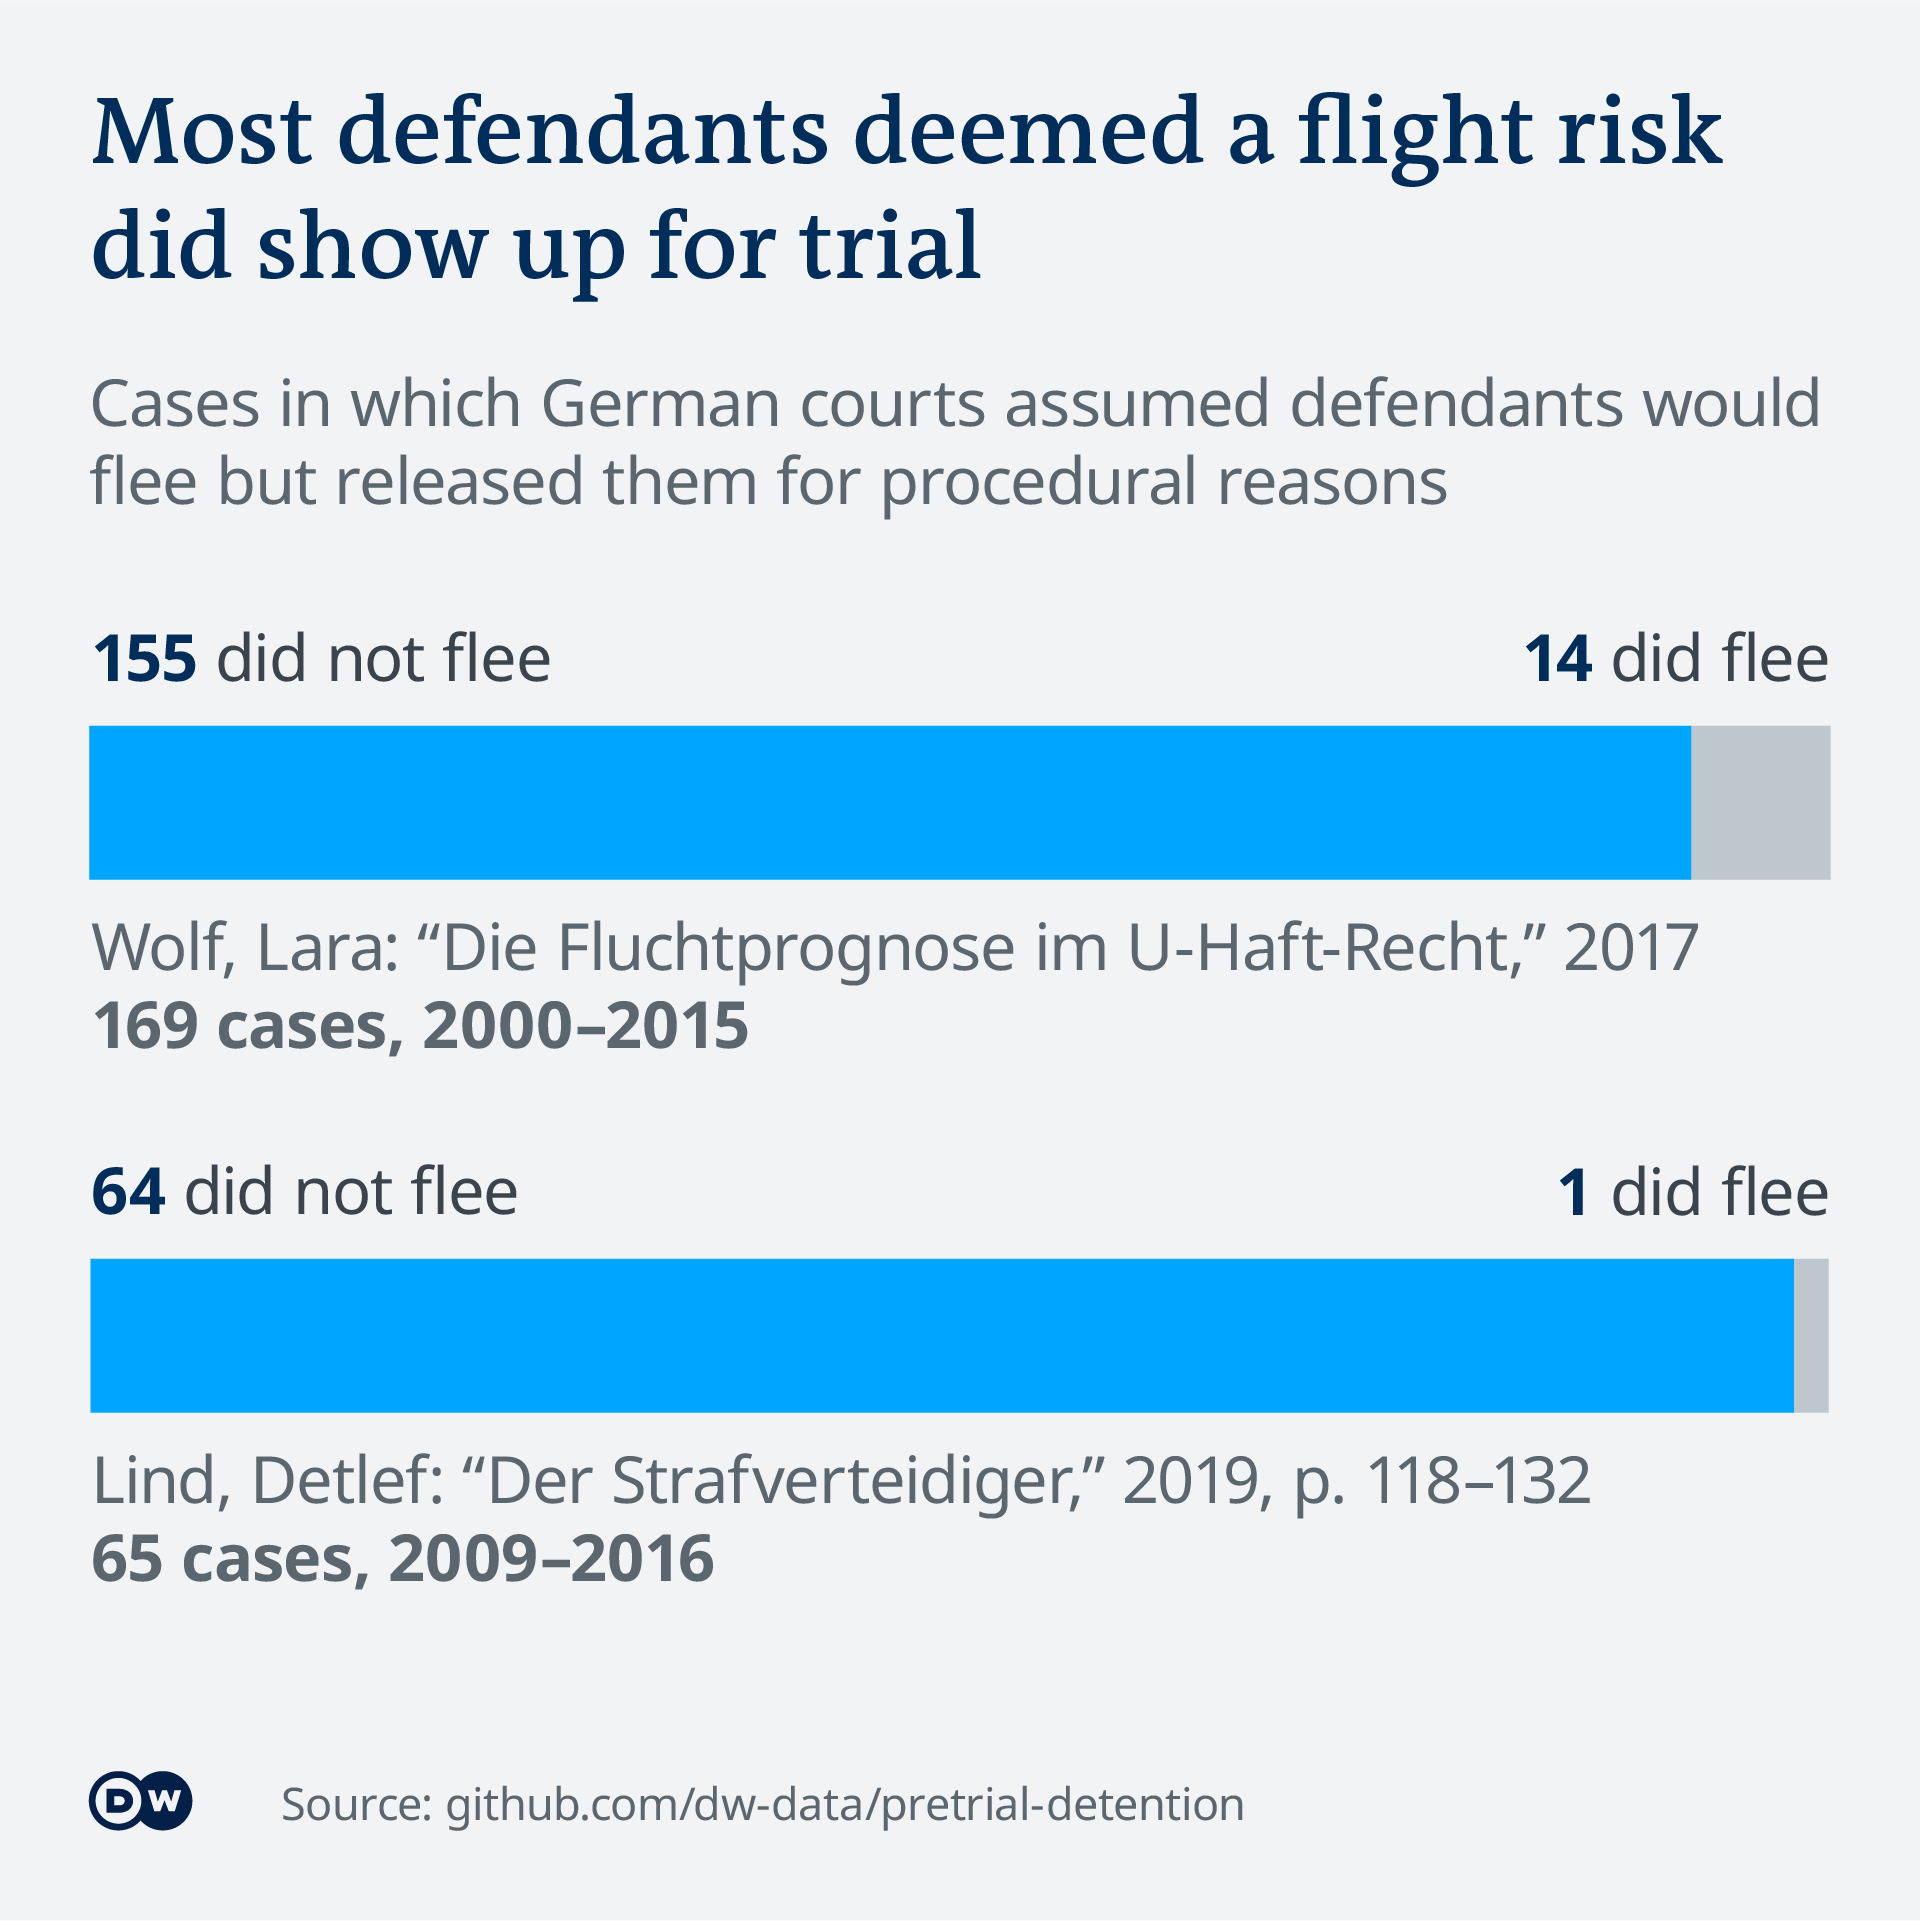 Data visualization showing two studies on cases in which German courts assumed defendants would flee but released them for procedural reasons. In both studies, over 90% of defendants deemed a flight risk did show up for trial.